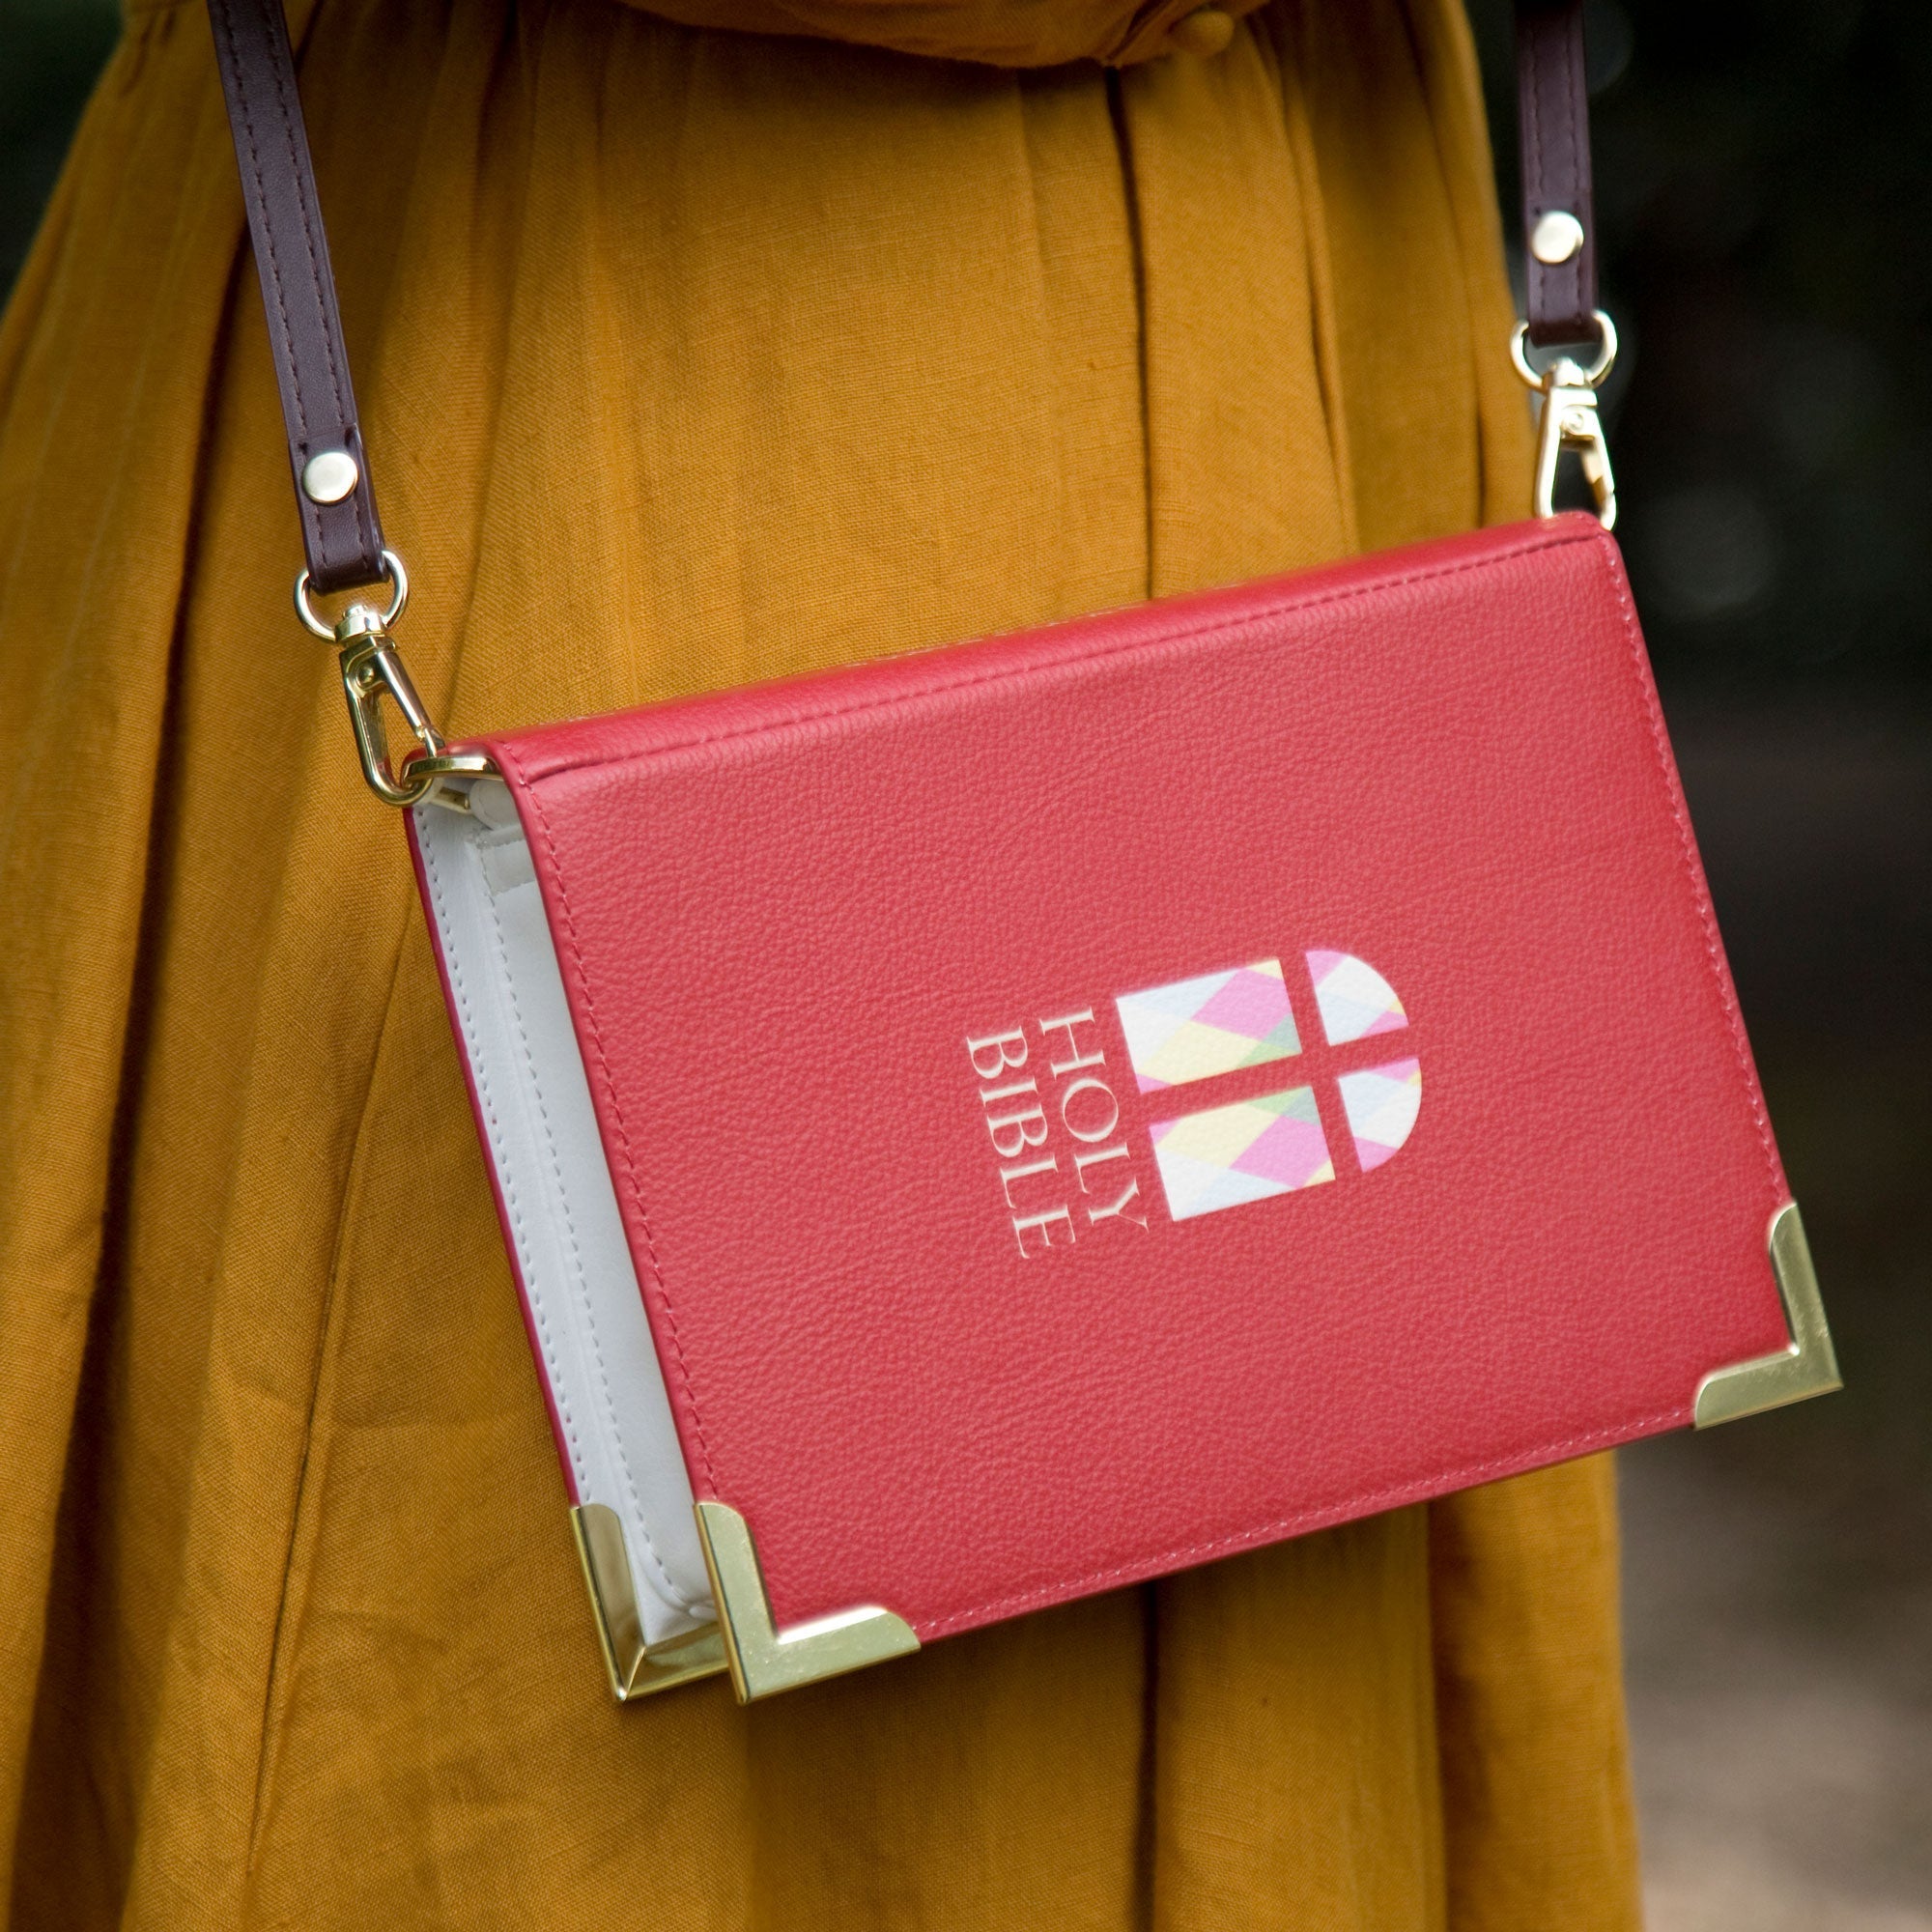 The Holy Bible Book Pouch Purse Clutch – Well Read Company